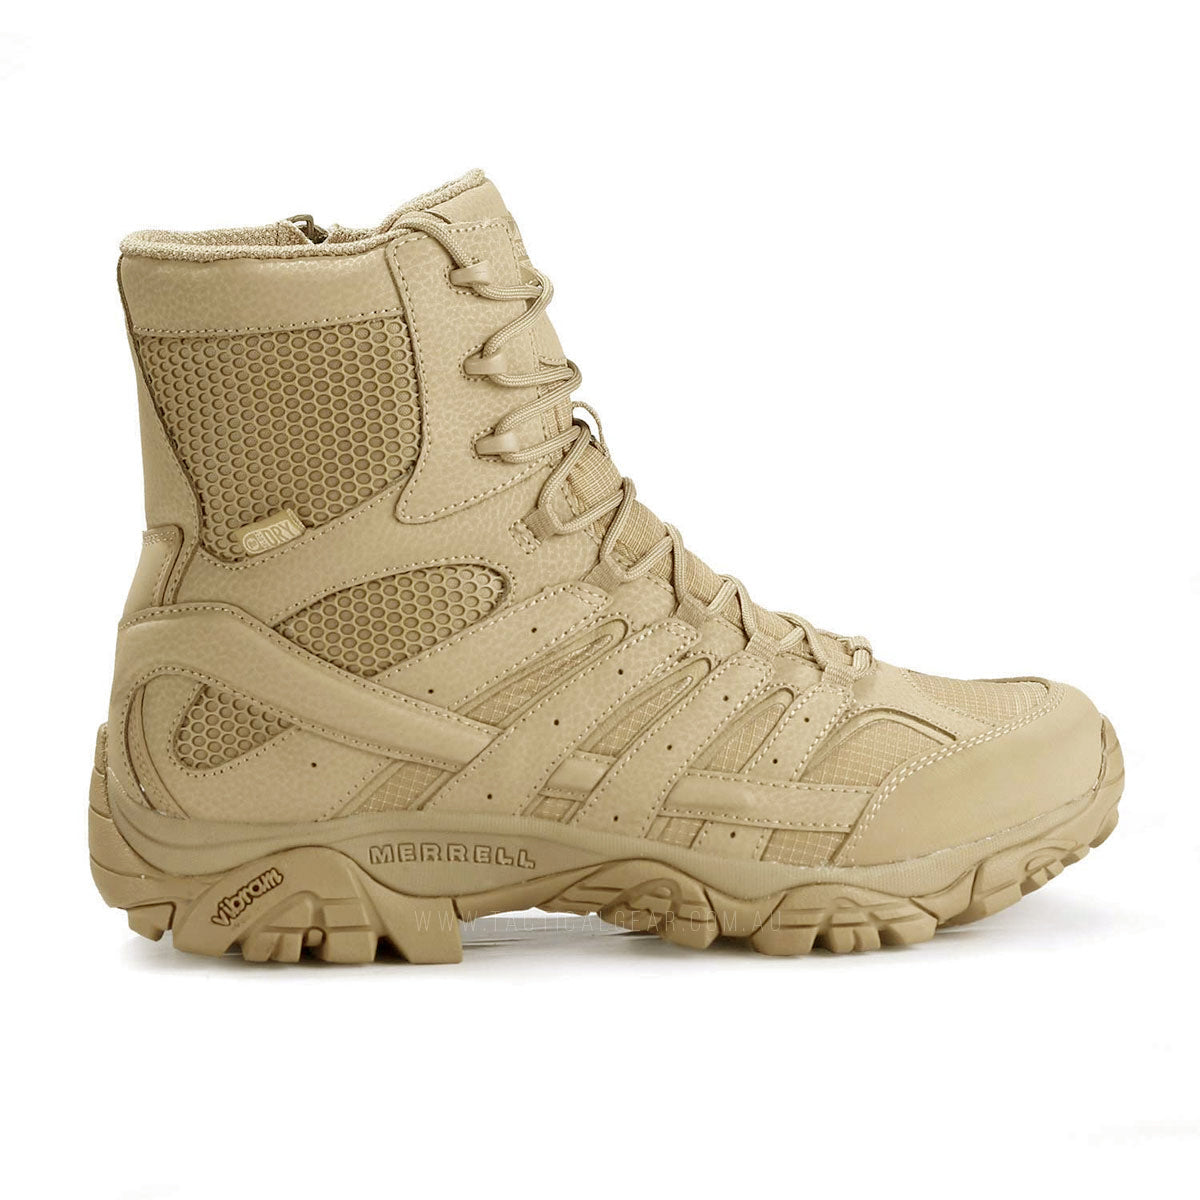 Merrell Tactical MOAB 2 Tactical Waterproof 8 Inches Side-Zip Boot Coyote 5 Gear Australia by G8